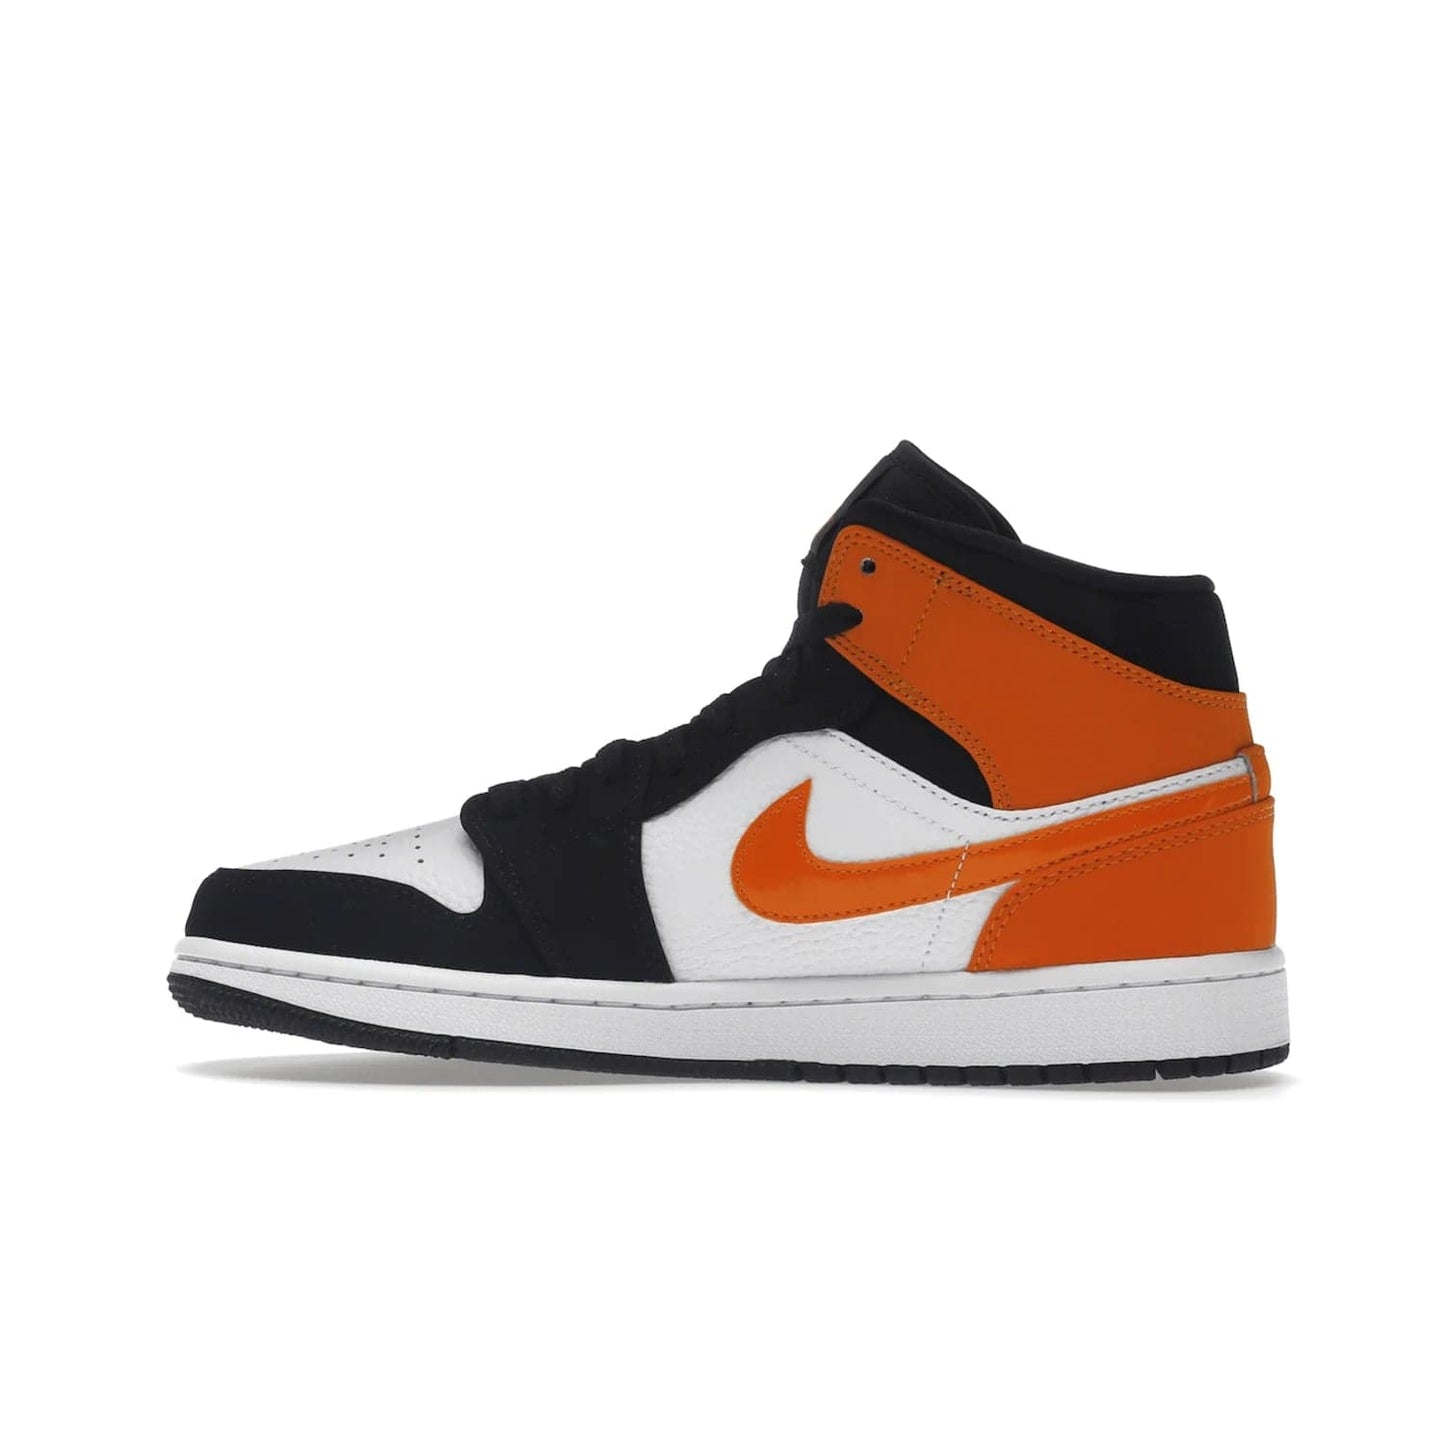 Jordan 1 Mid Shattered Backboard - Image 20 - Only at www.BallersClubKickz.com - The Air Jordan 1 Mid Shattered Backboard offers a timeless Black/White-Starfish colorway. Classic Swoosh logo and AJ insignia plus a shatterd backboard graphic on the insole. Get your pair today!